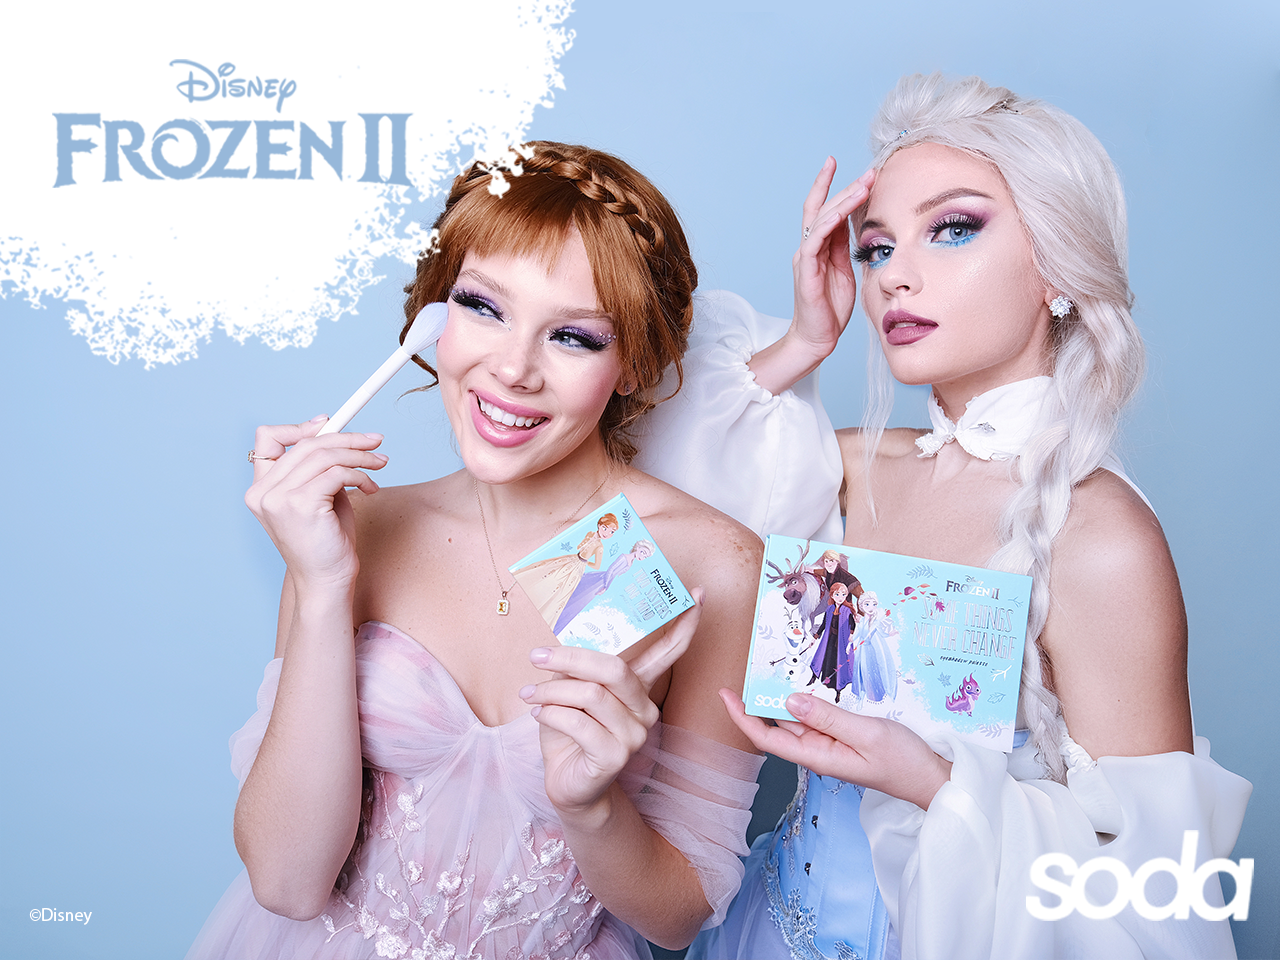 SODA Makeup and Disney’s Frozen II collaborate on magical new makeup collection